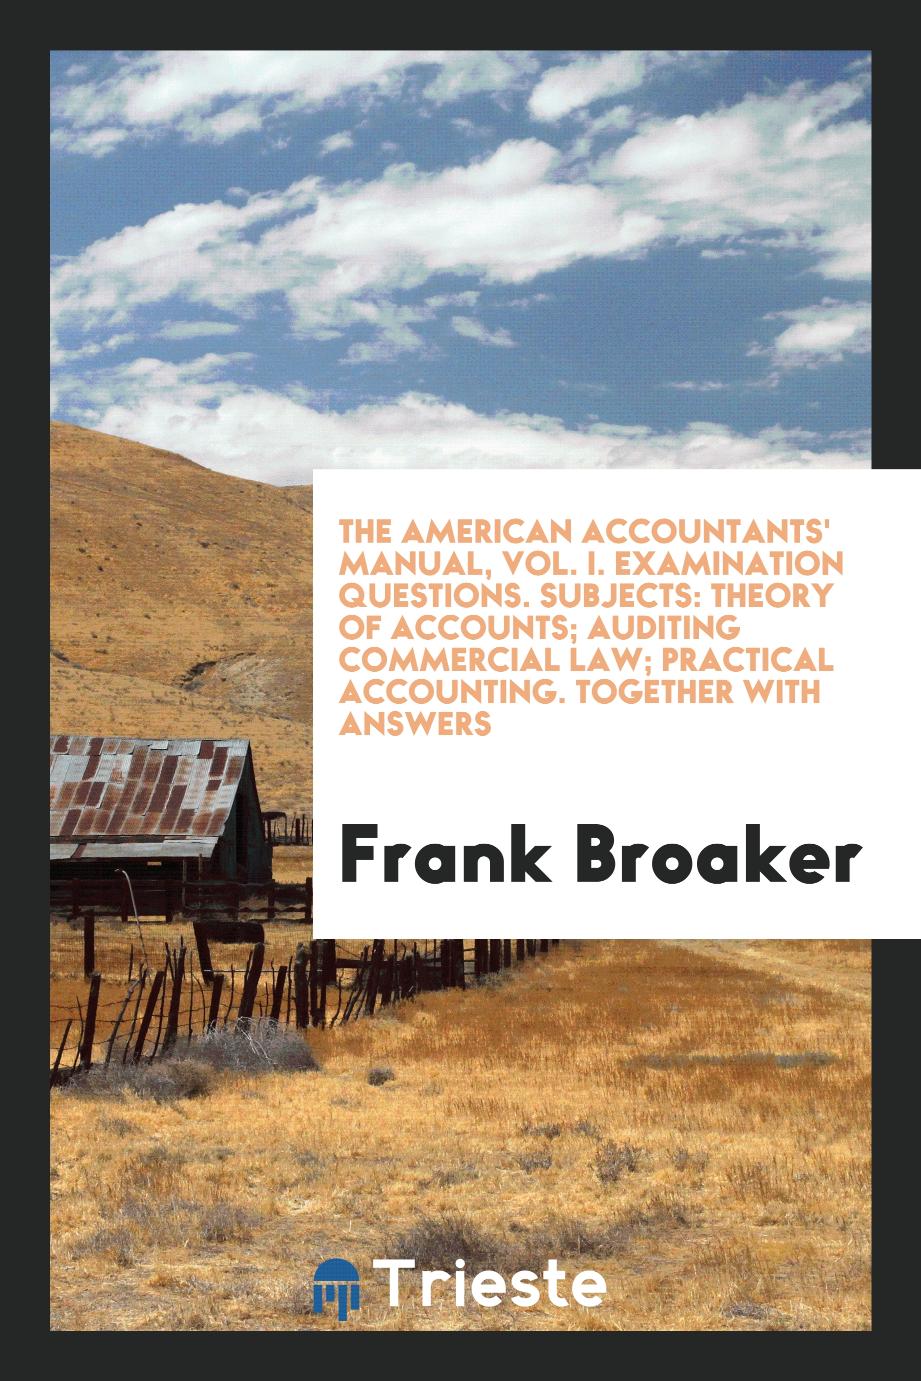 The American accountants' manual, vol. I. Examination questions. Subjects: Theory of Accounts; Auditing Commercial Law; Practical Accounting. Together with answers